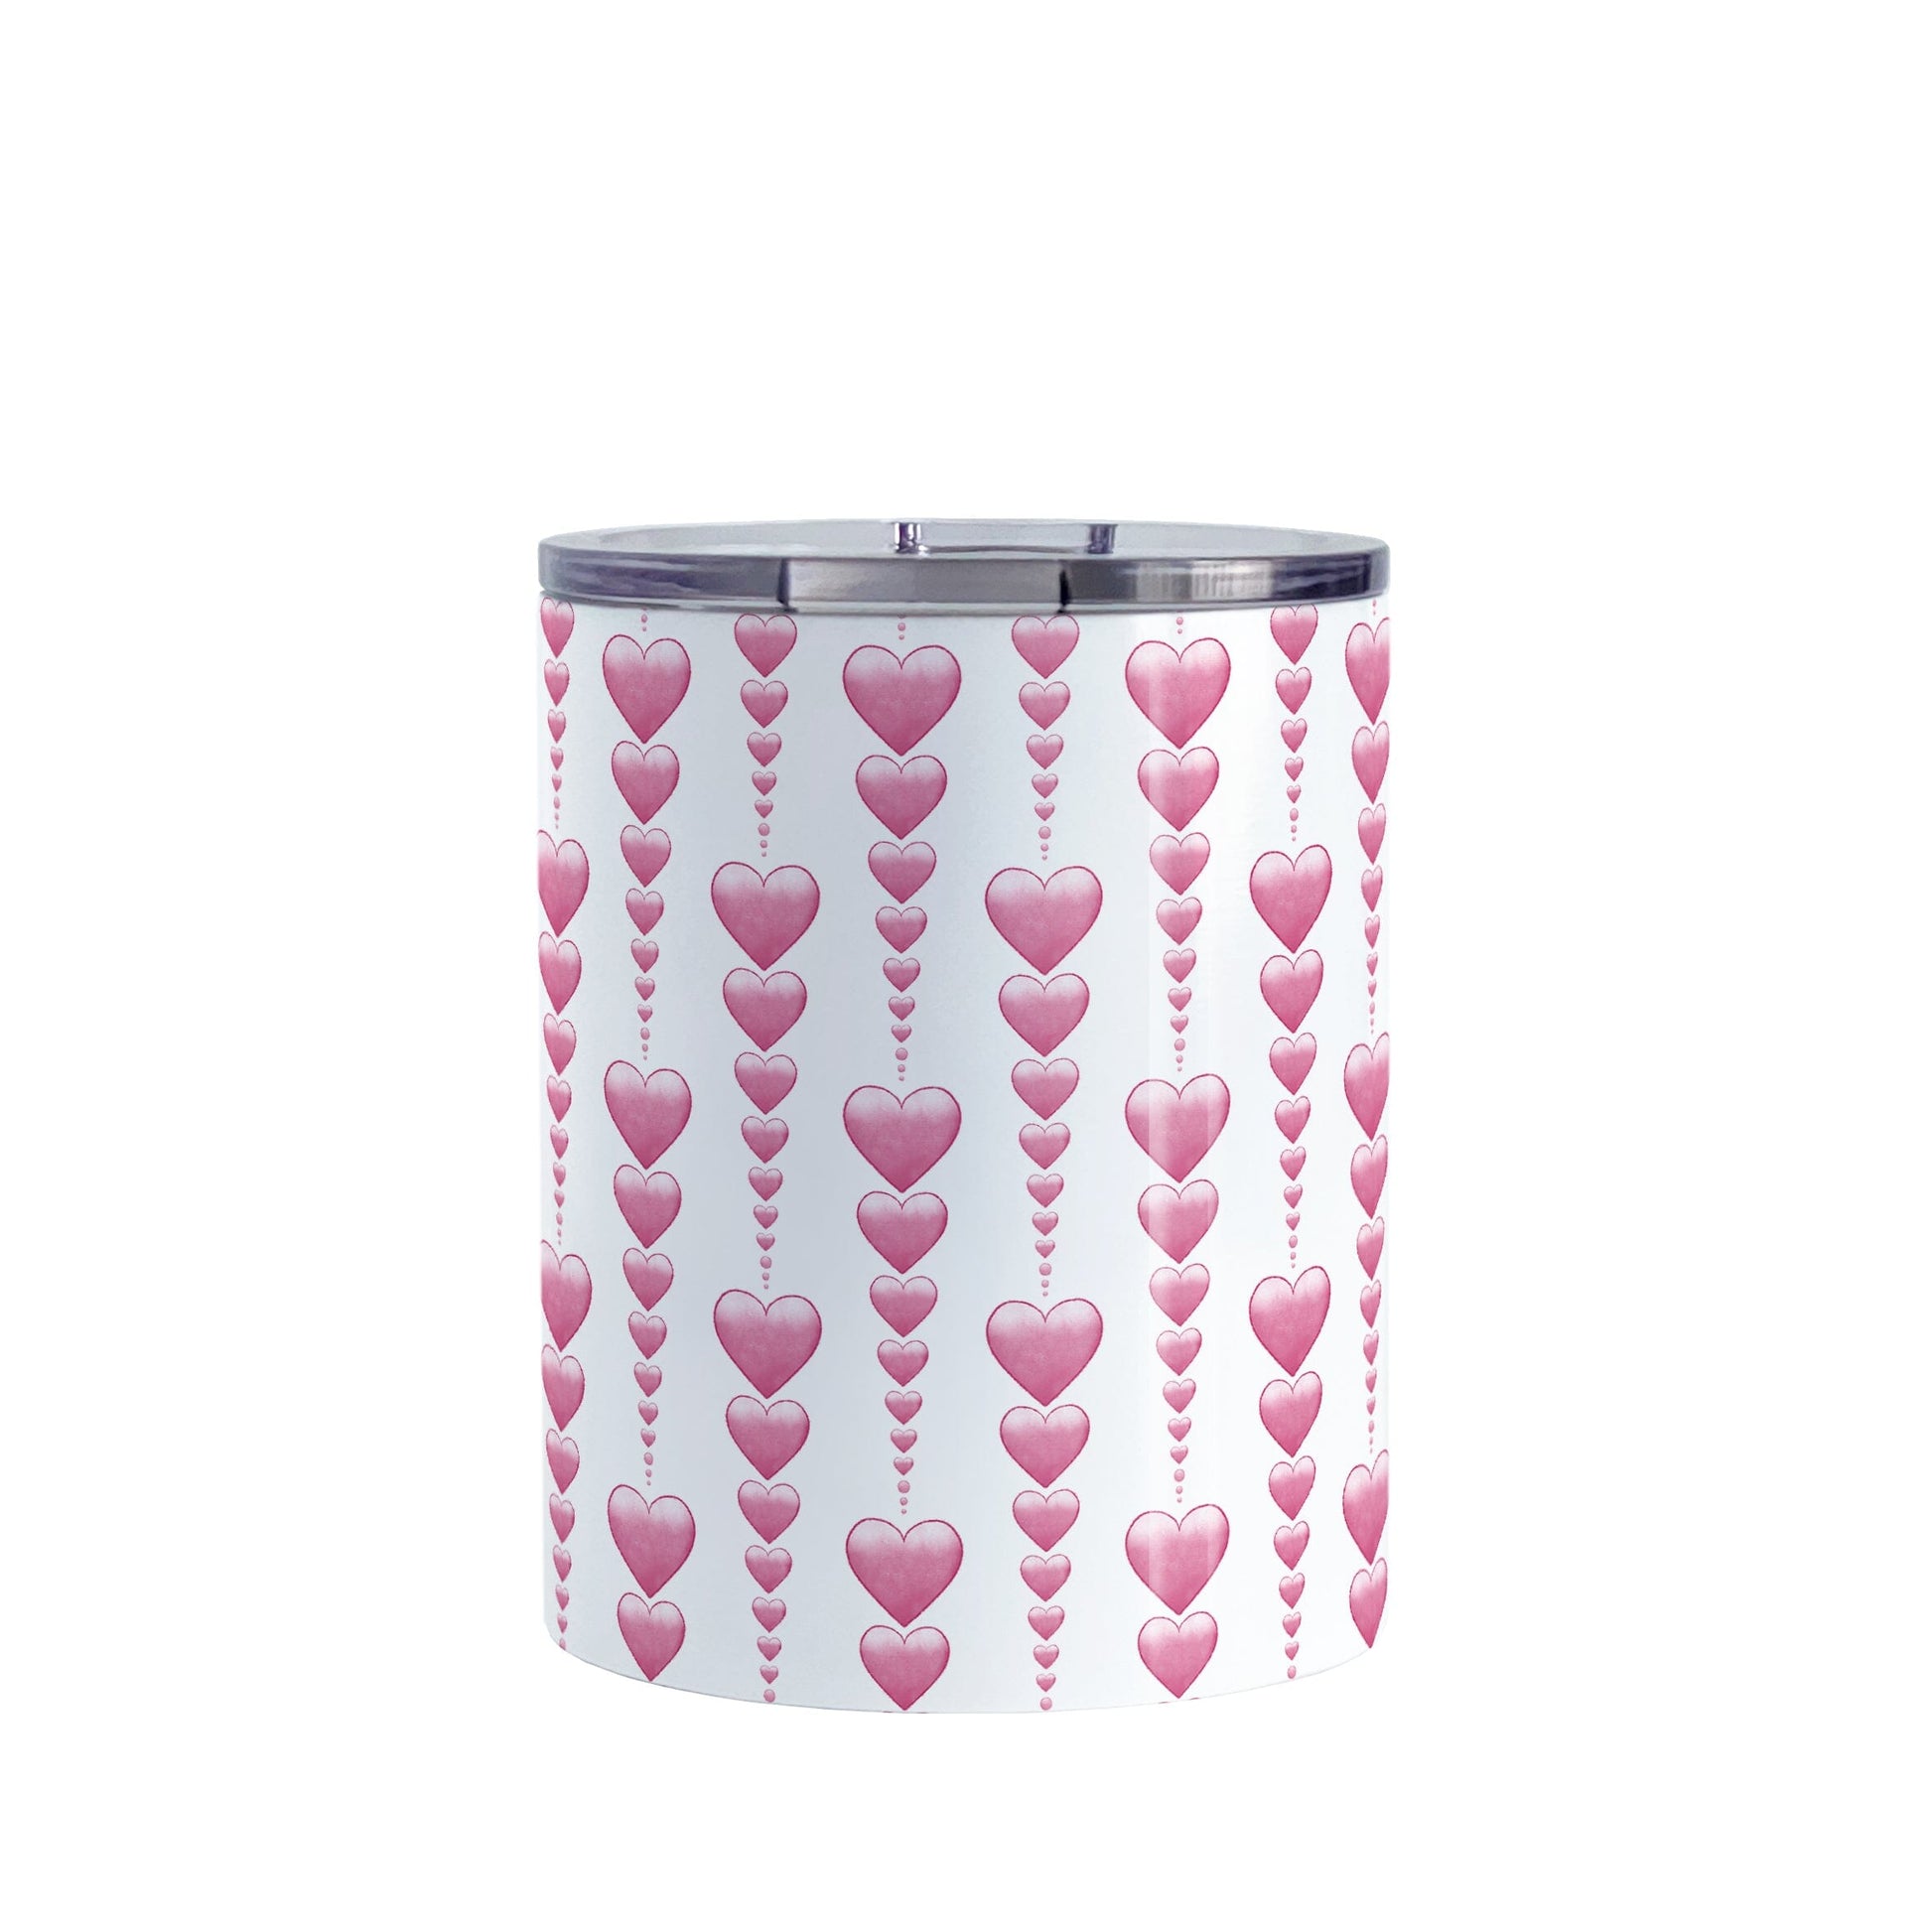 Heart Strings Tumbler Cup (10oz) at Amy's Coffee Mugs. A stainless steel insulated tumbler cup designed with strings of pink hearts descending in size in a pattern that wraps around the cup.